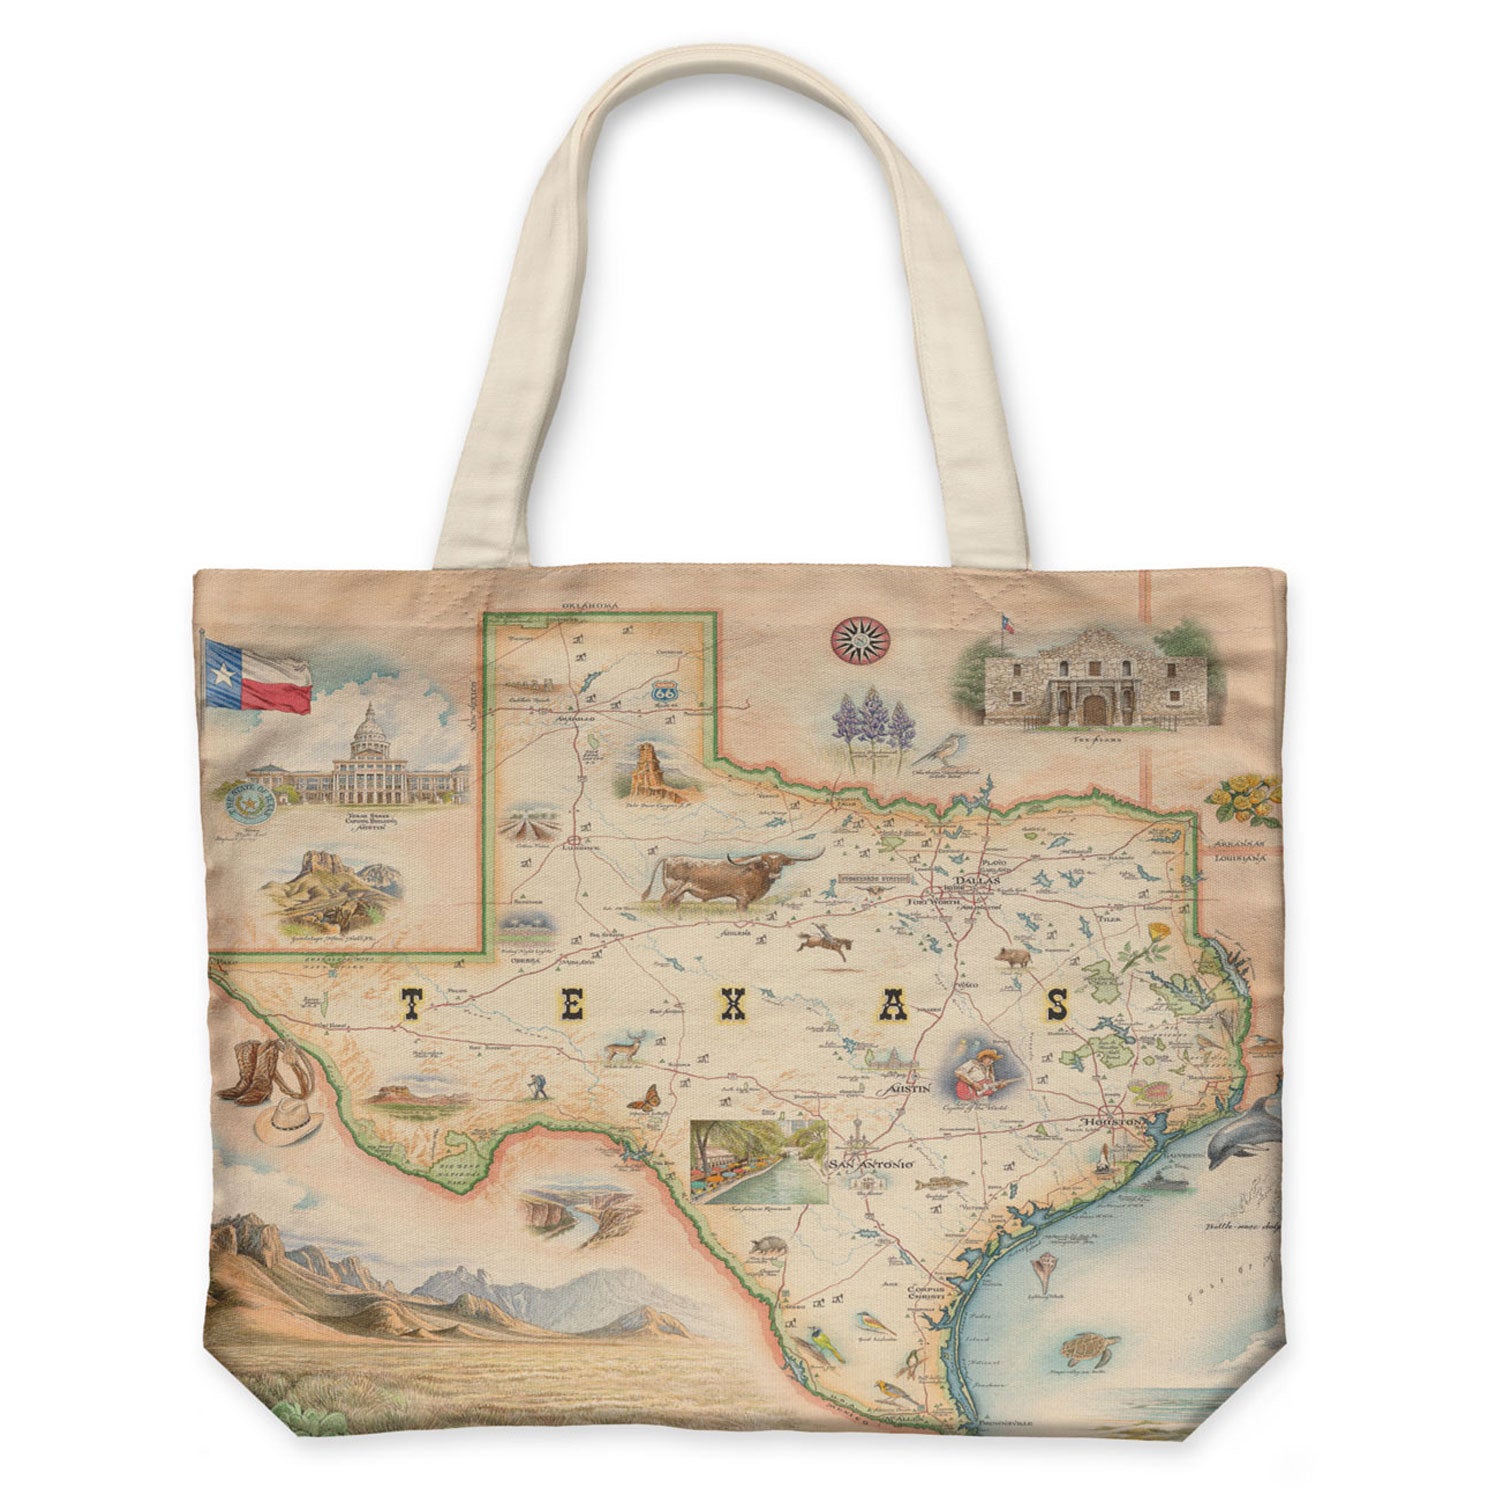 Compo Tote Bag by Houston Prior - Pixels